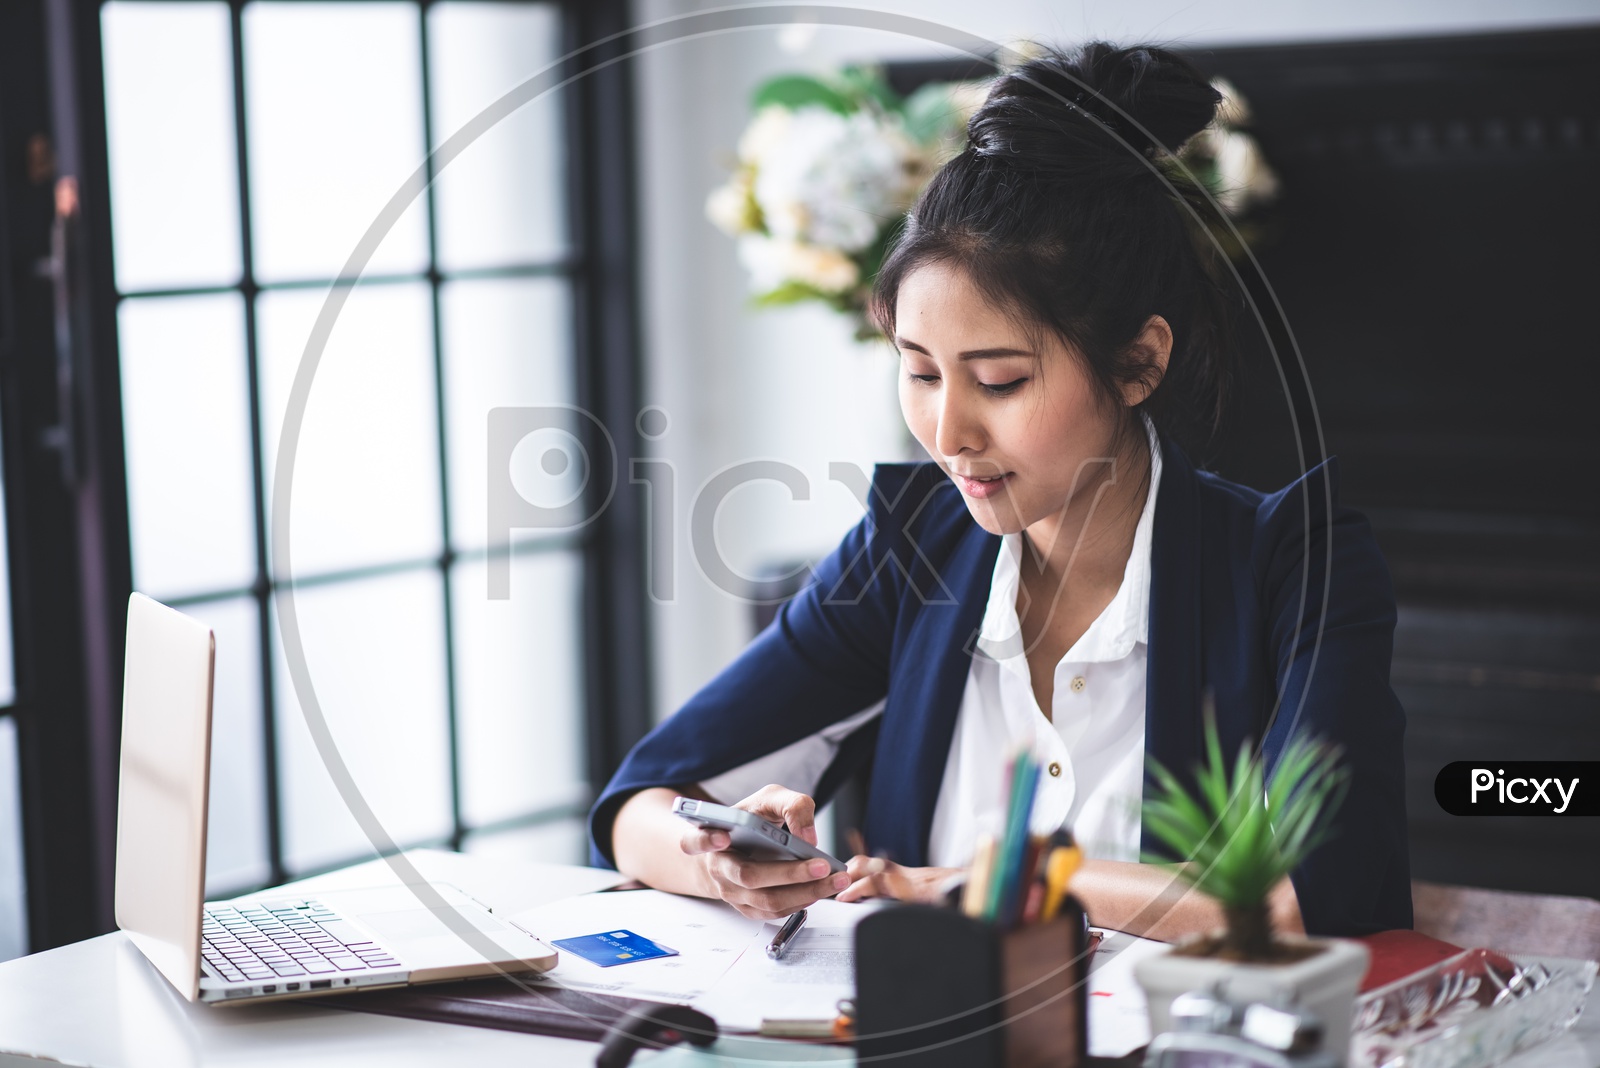 Young Asian Businesswoman using Mobile or Smartphone while working on Laptop at Workplace